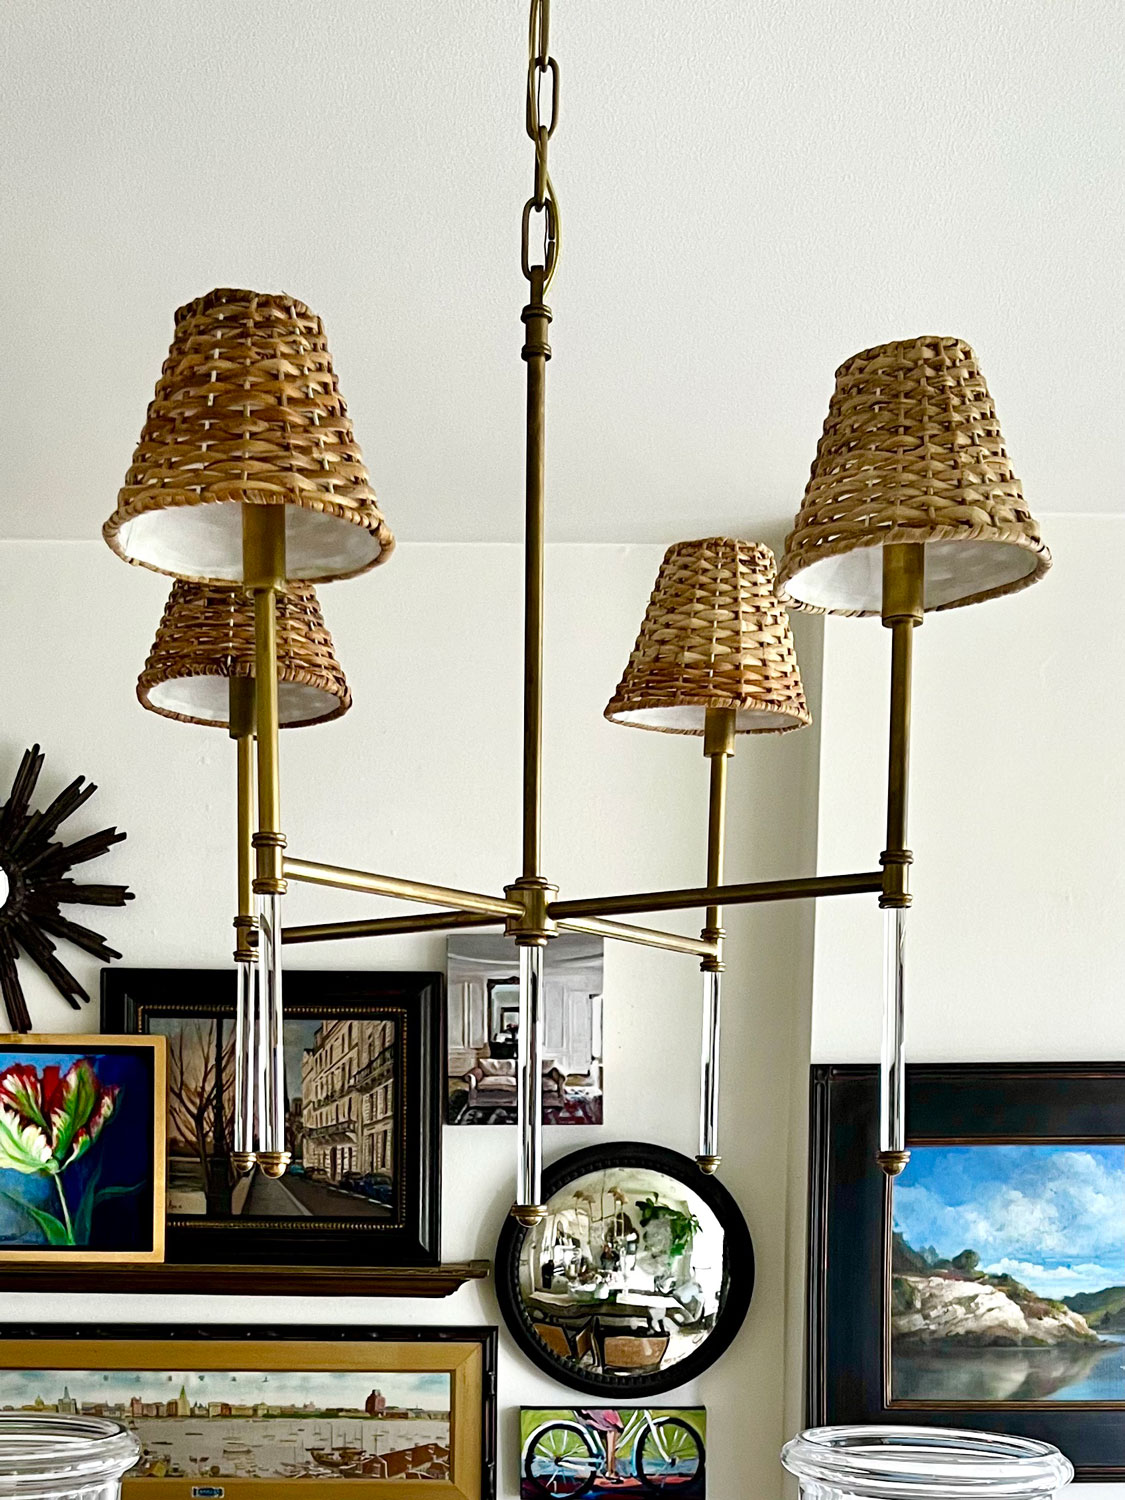 easy ways to refresh your home like with new lampshades